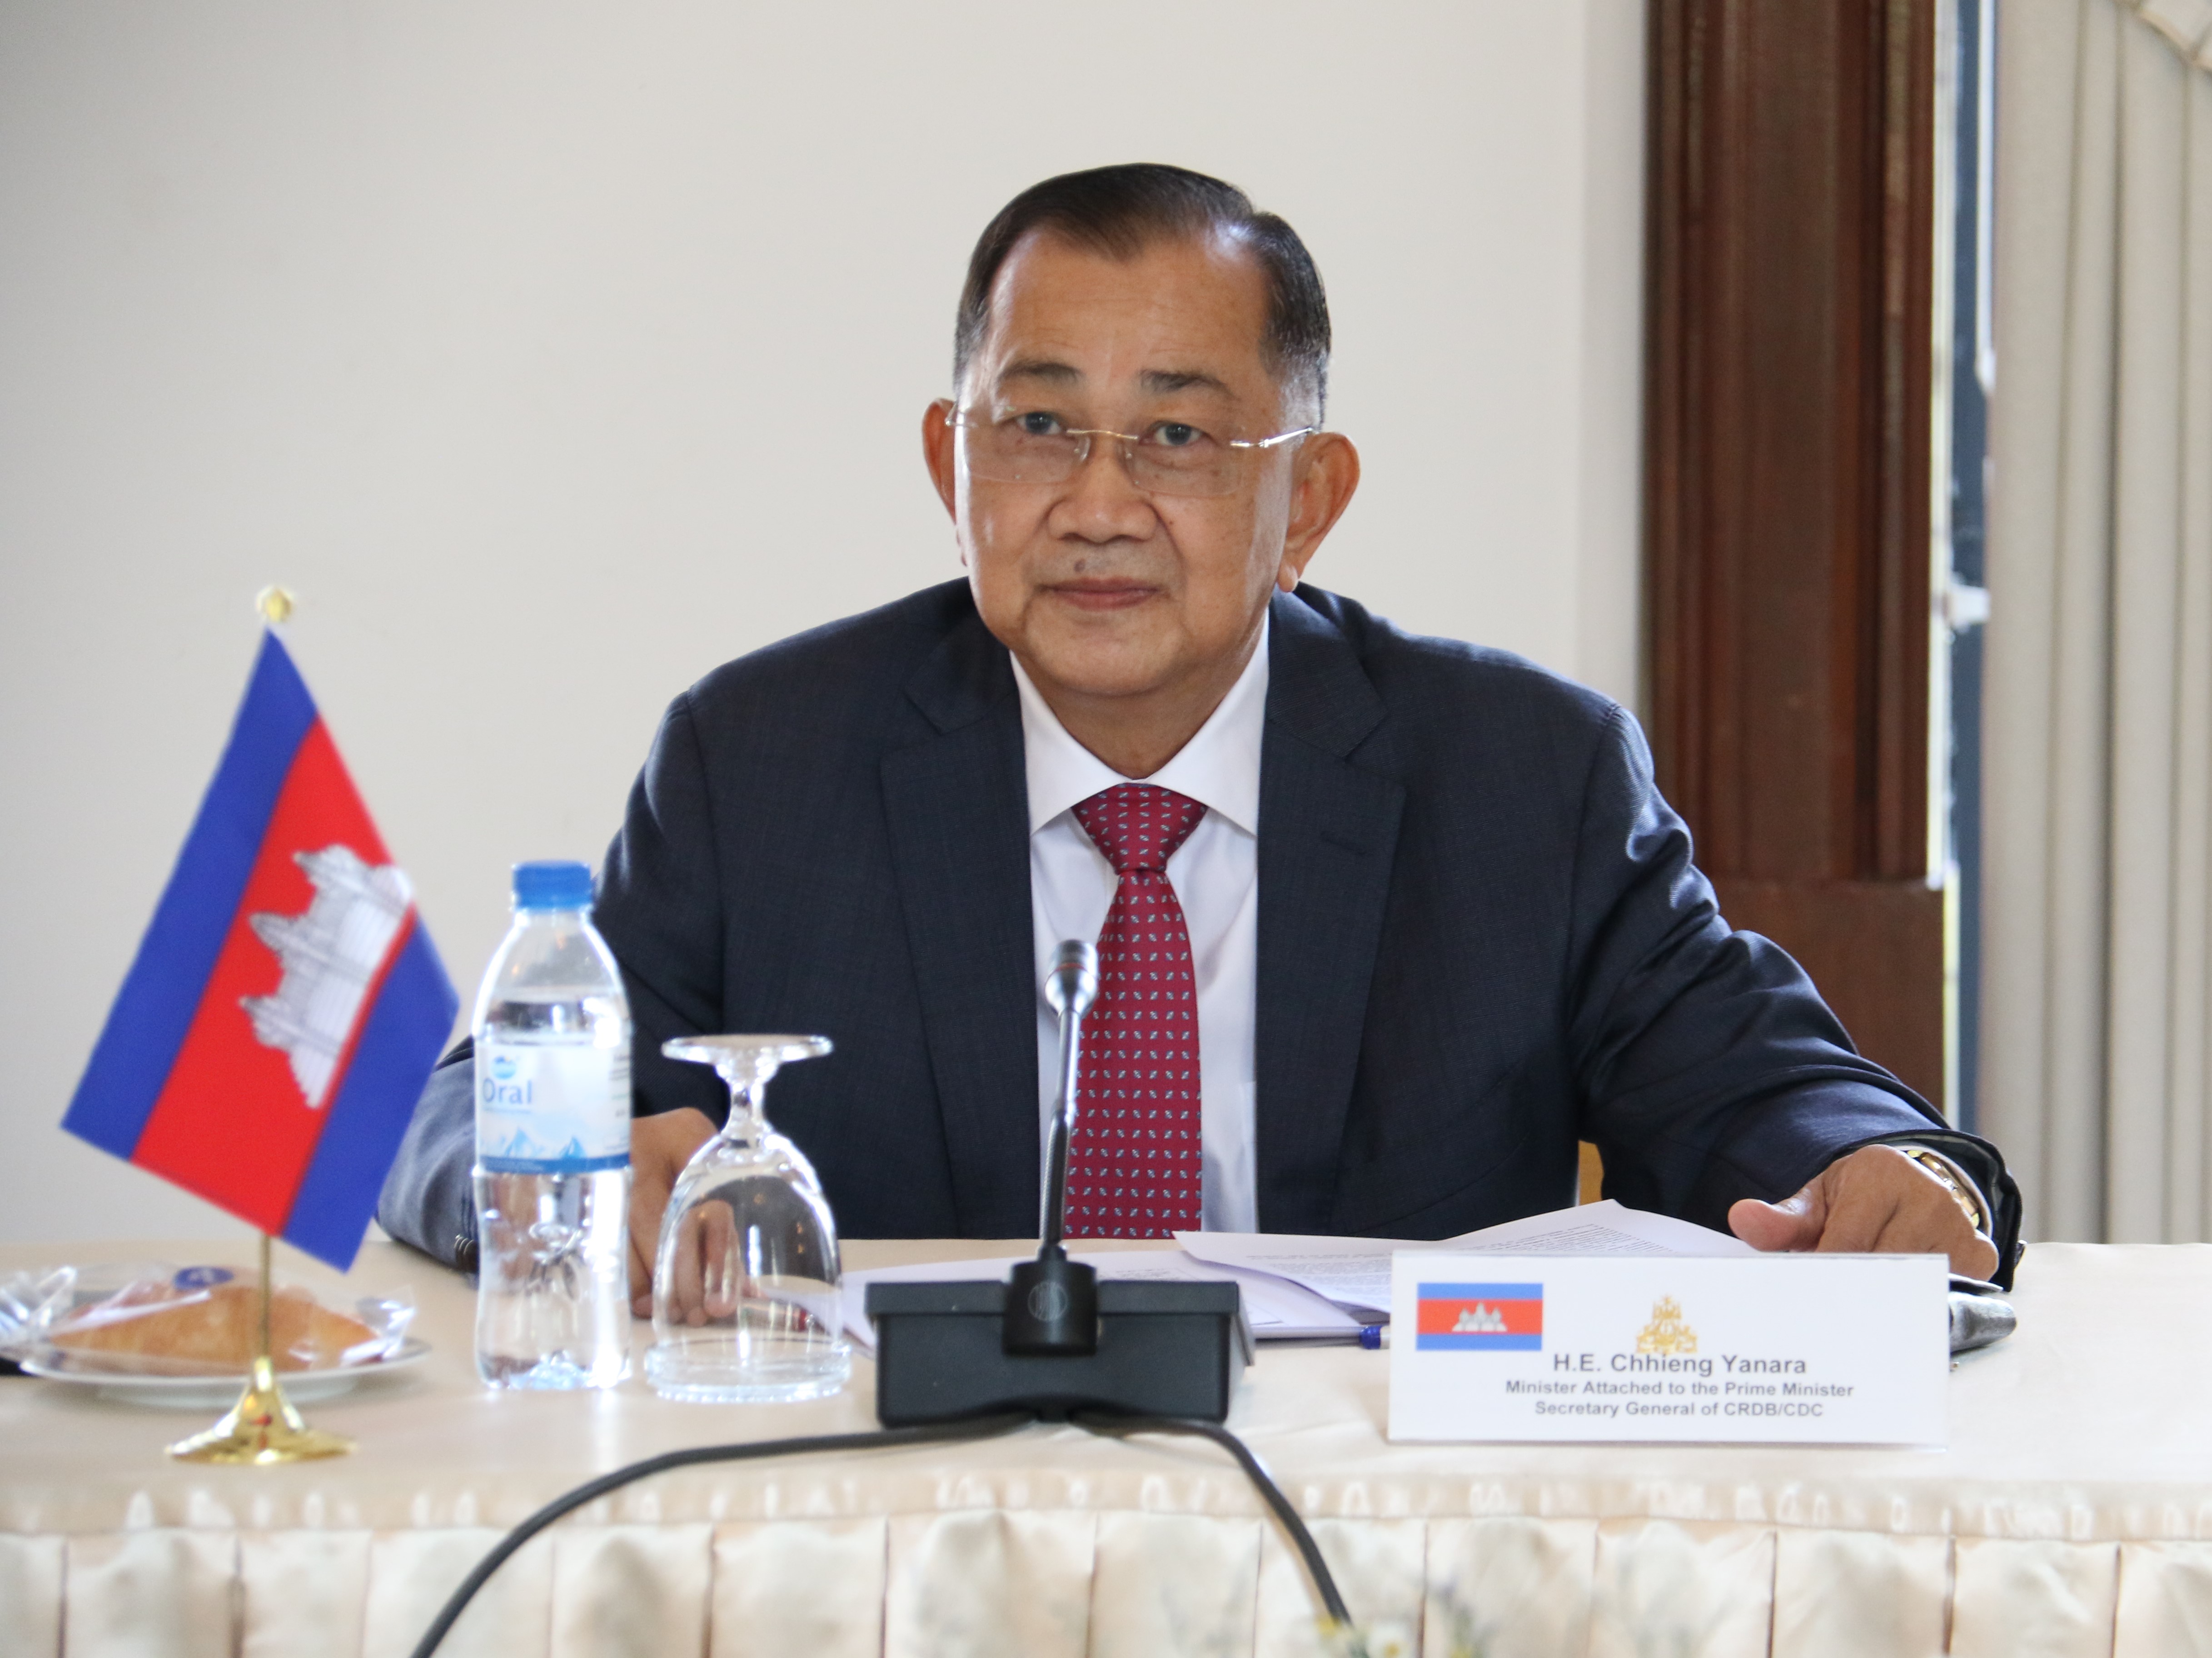 Sectoral Dialogue on Sustainable Economic Development between the Royal Government of Cambodia (RGC) and the Government of Federal Republic of Germany